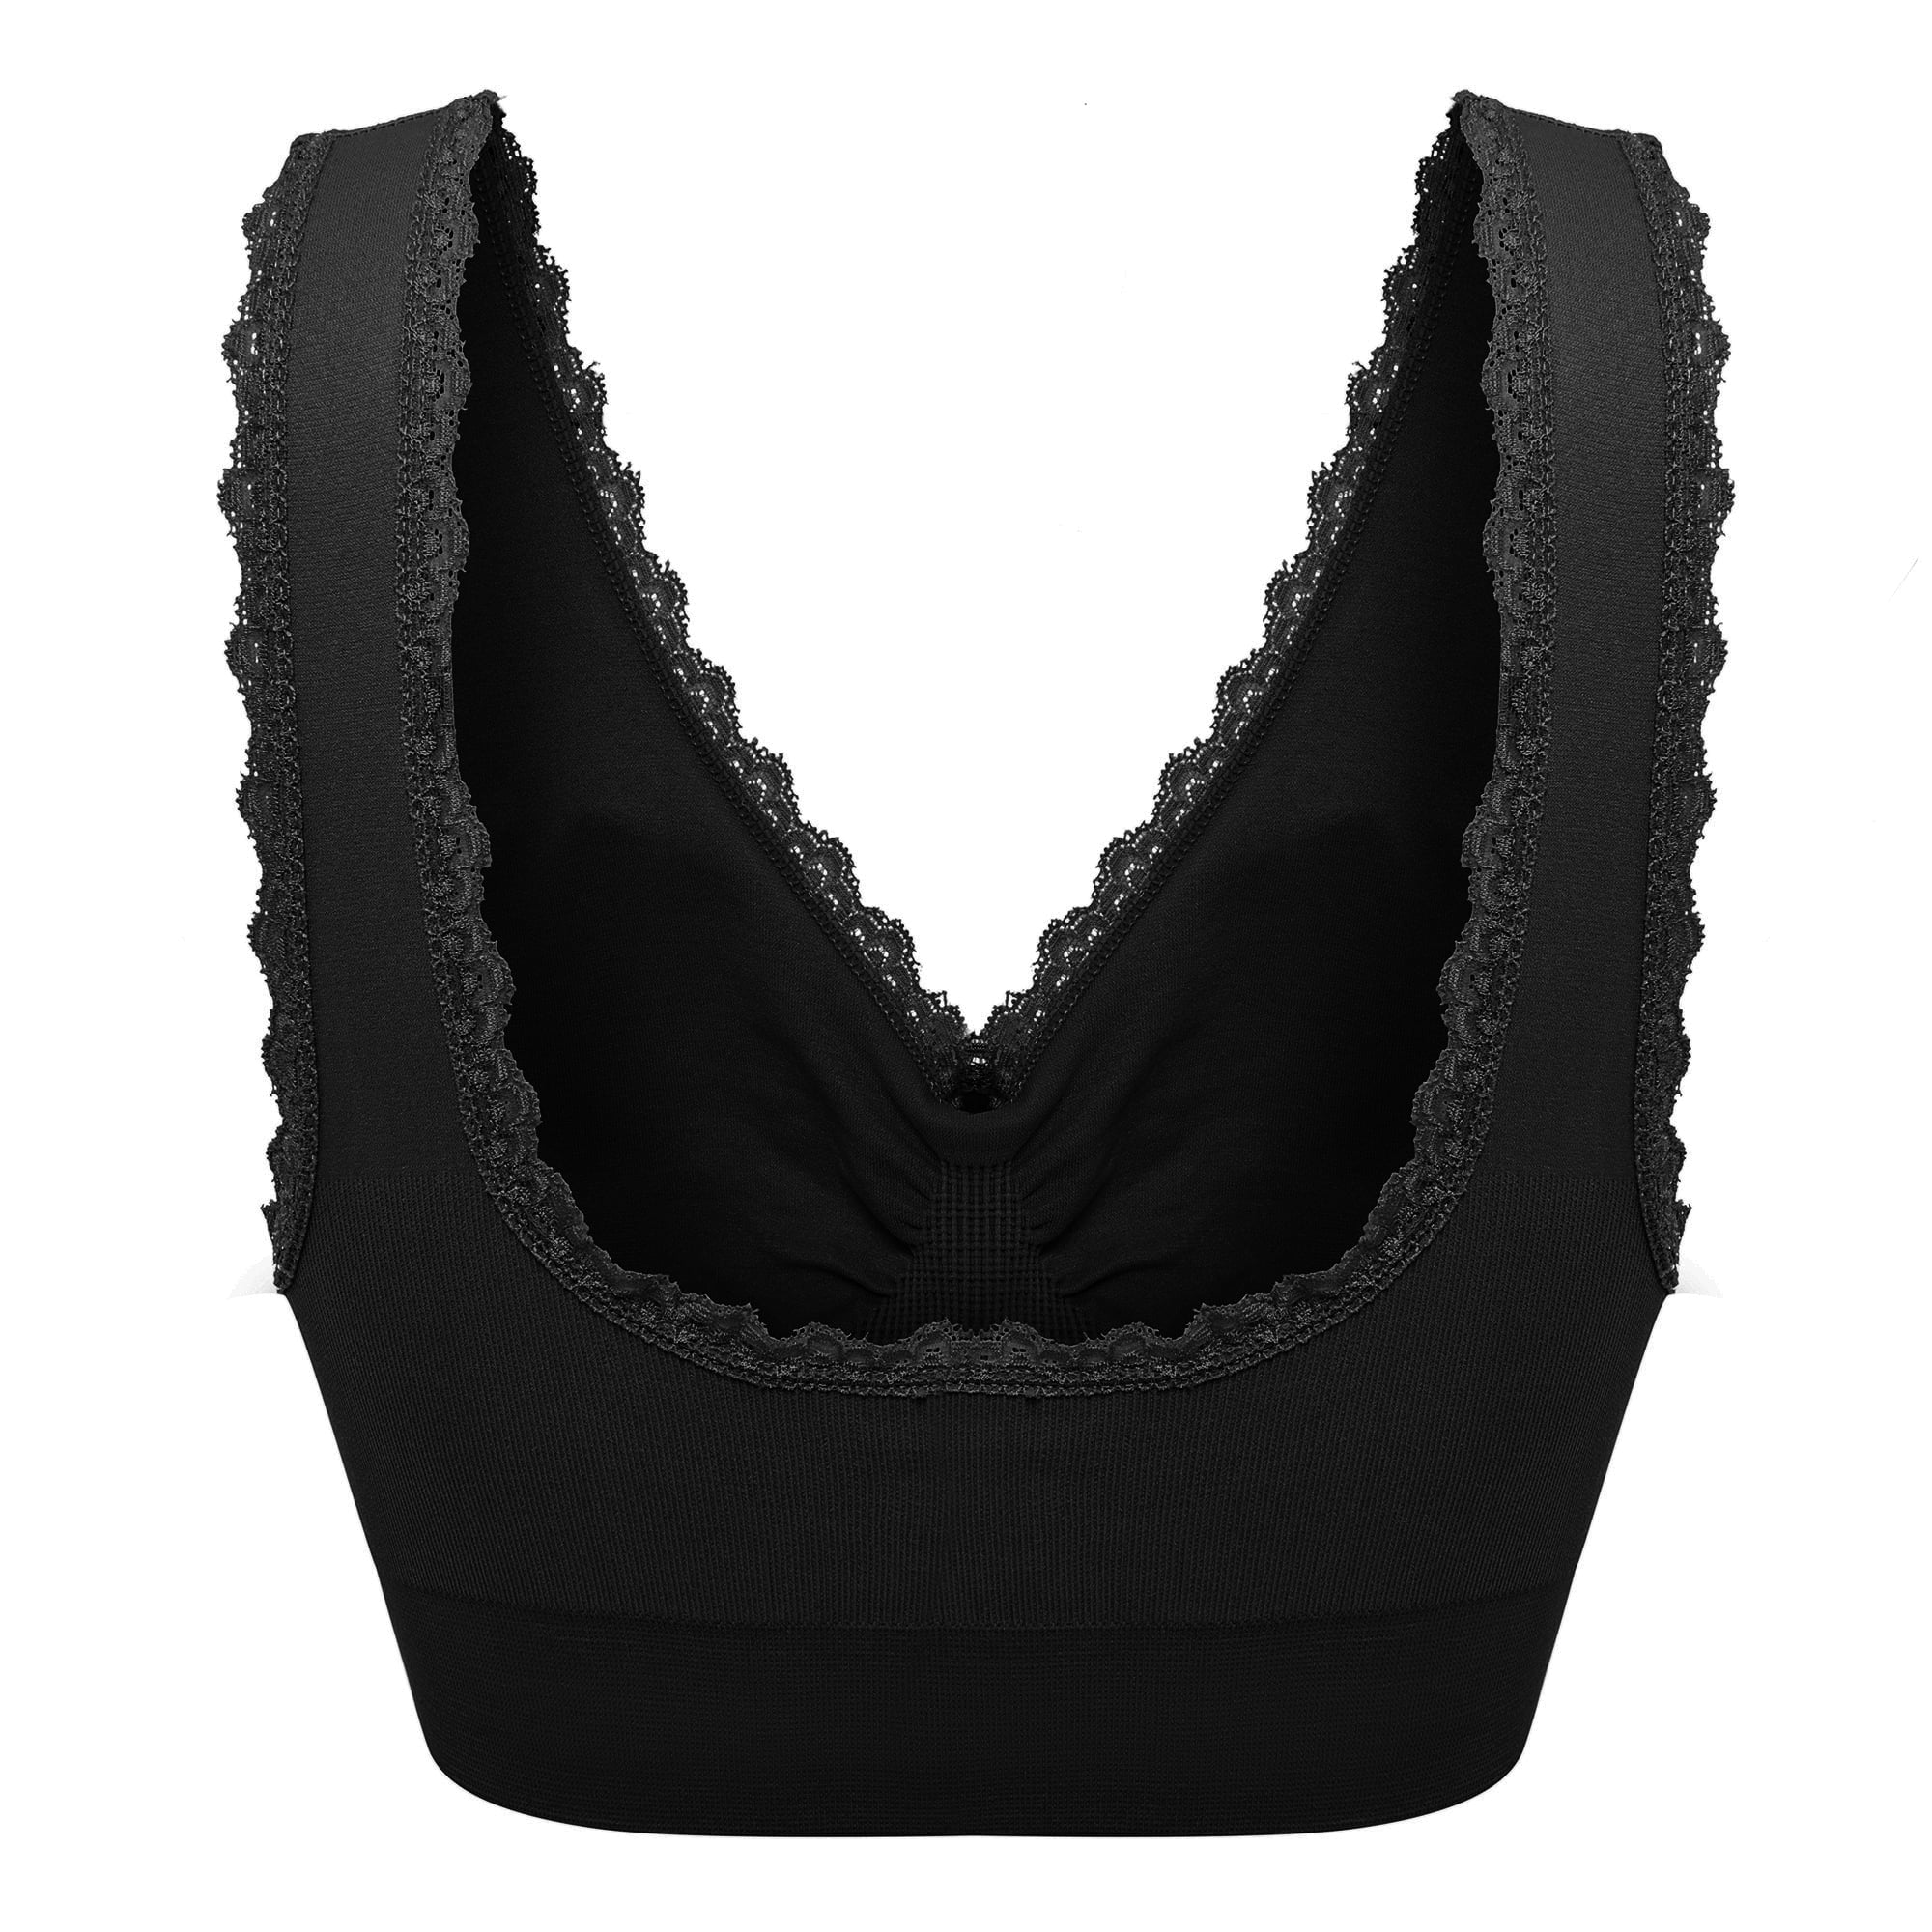 Lace Bralette for Women Lace Bralette Padded Lace Bandeau Bra with Straps  for Women Girls Glasses Pouch Black at  Women's Clothing store